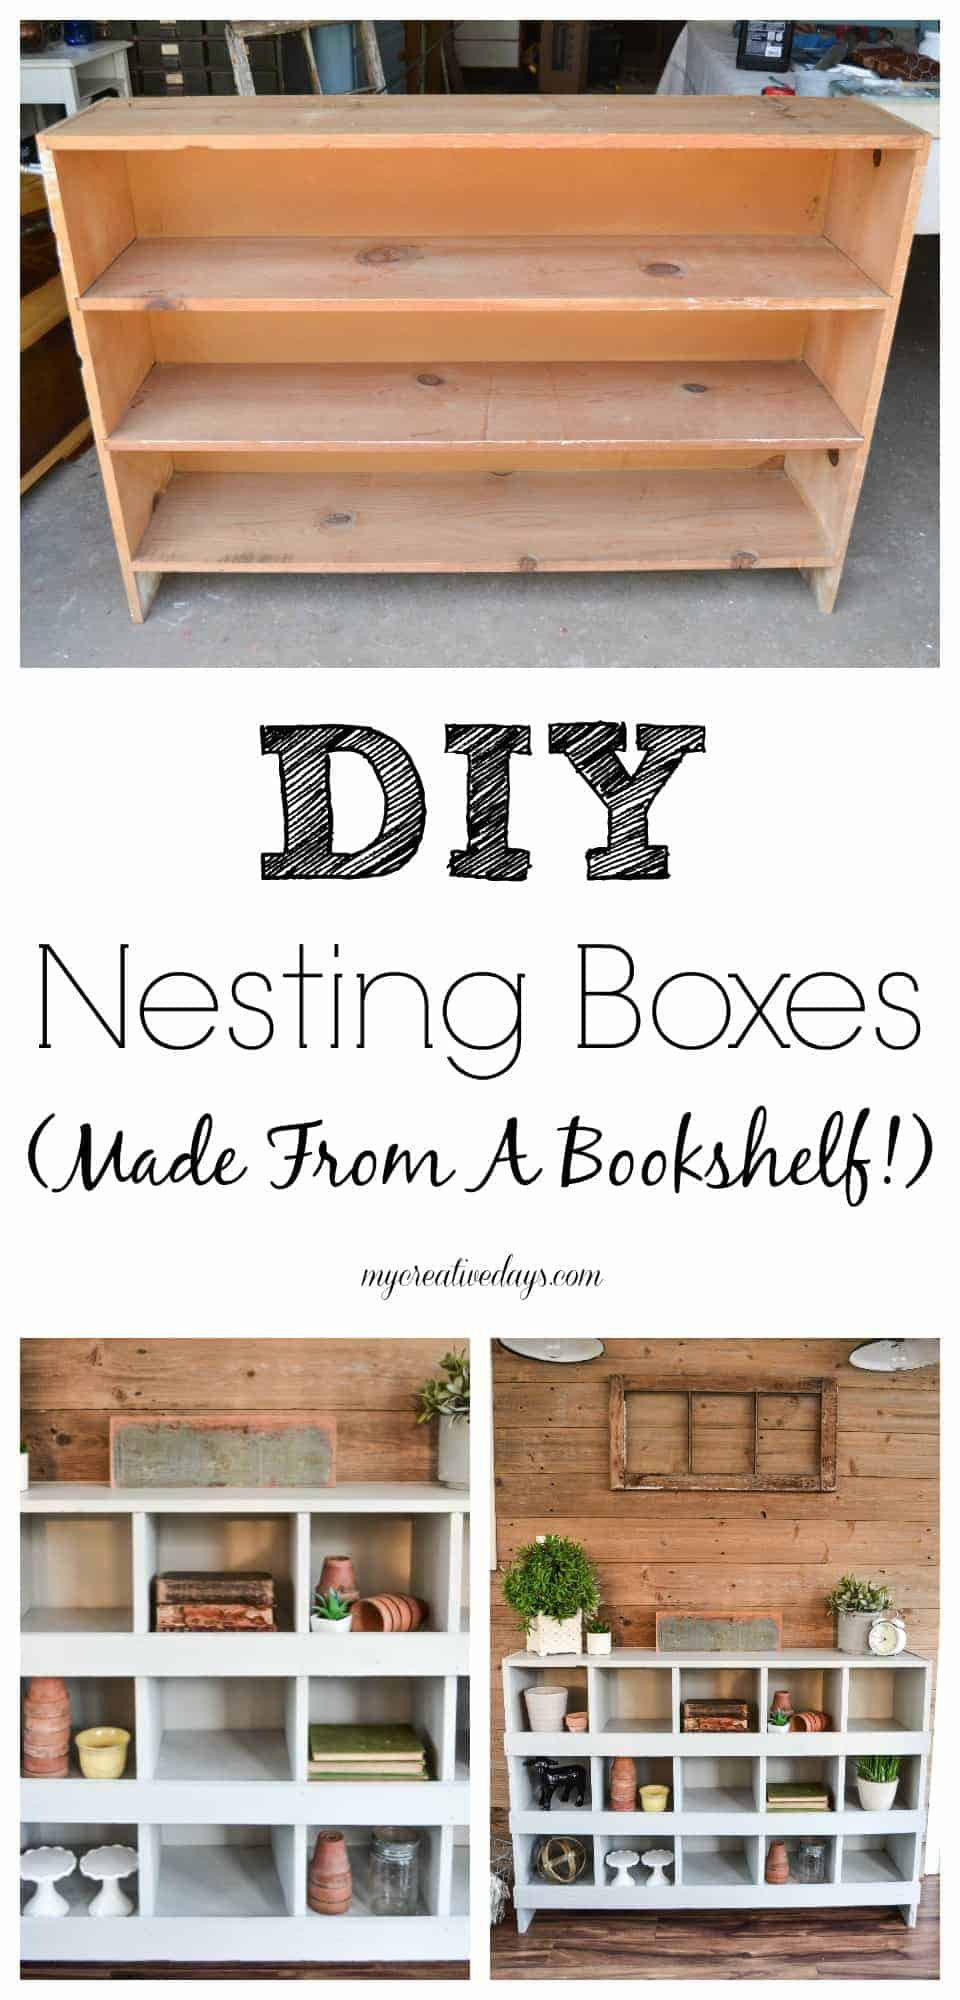 DIY Nesting Boxes
 DIY Nesting Boxes Made From A Bookshelf  My Creative Days